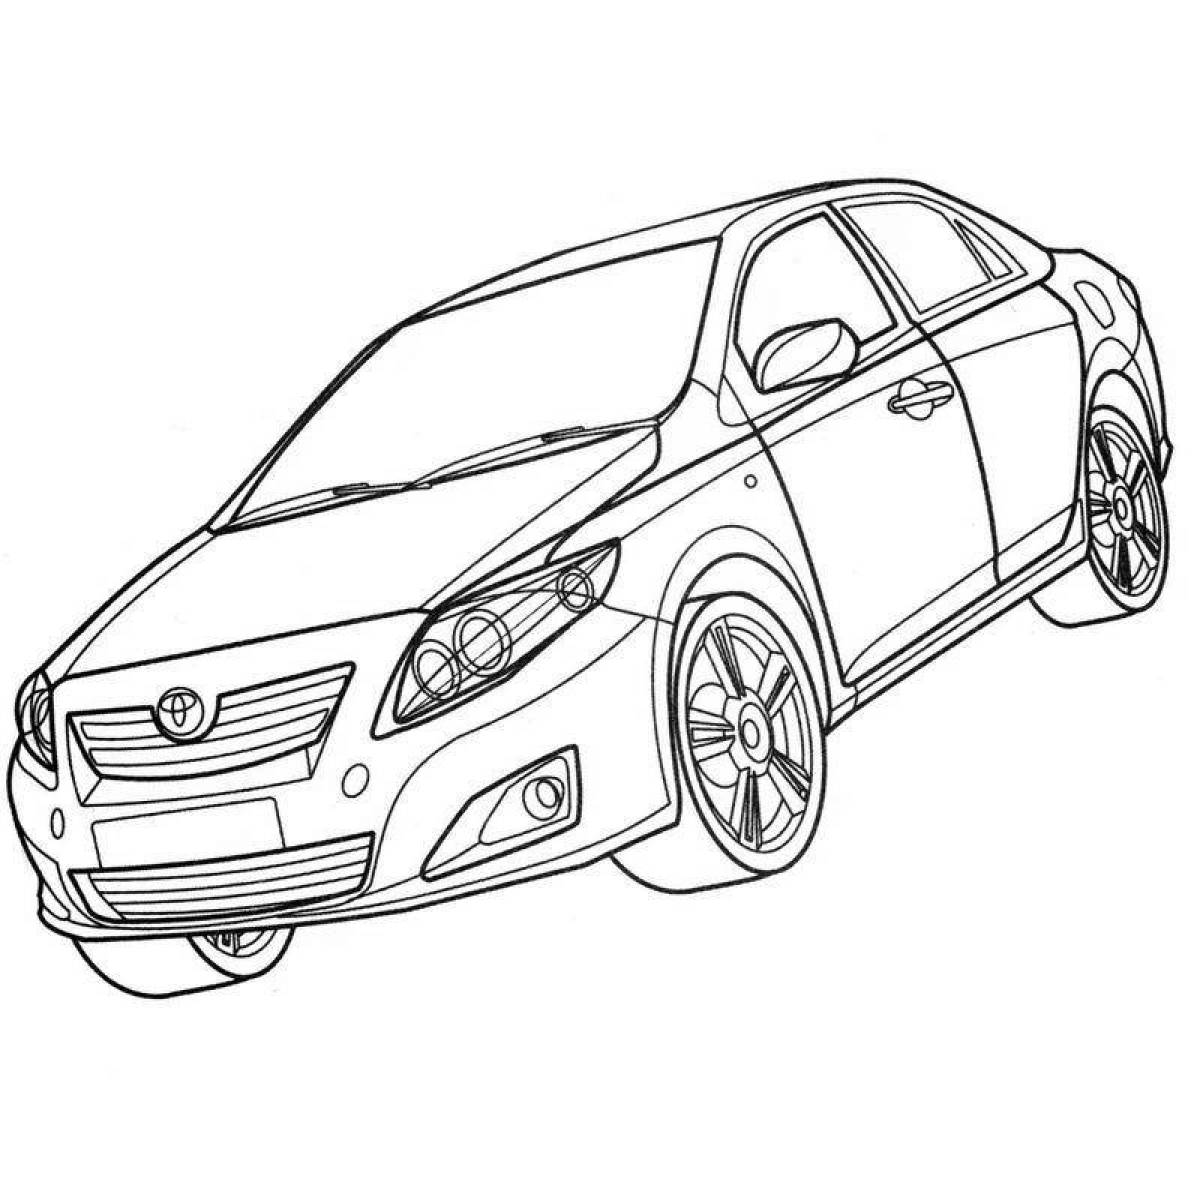 Toyota camry bright coloring page